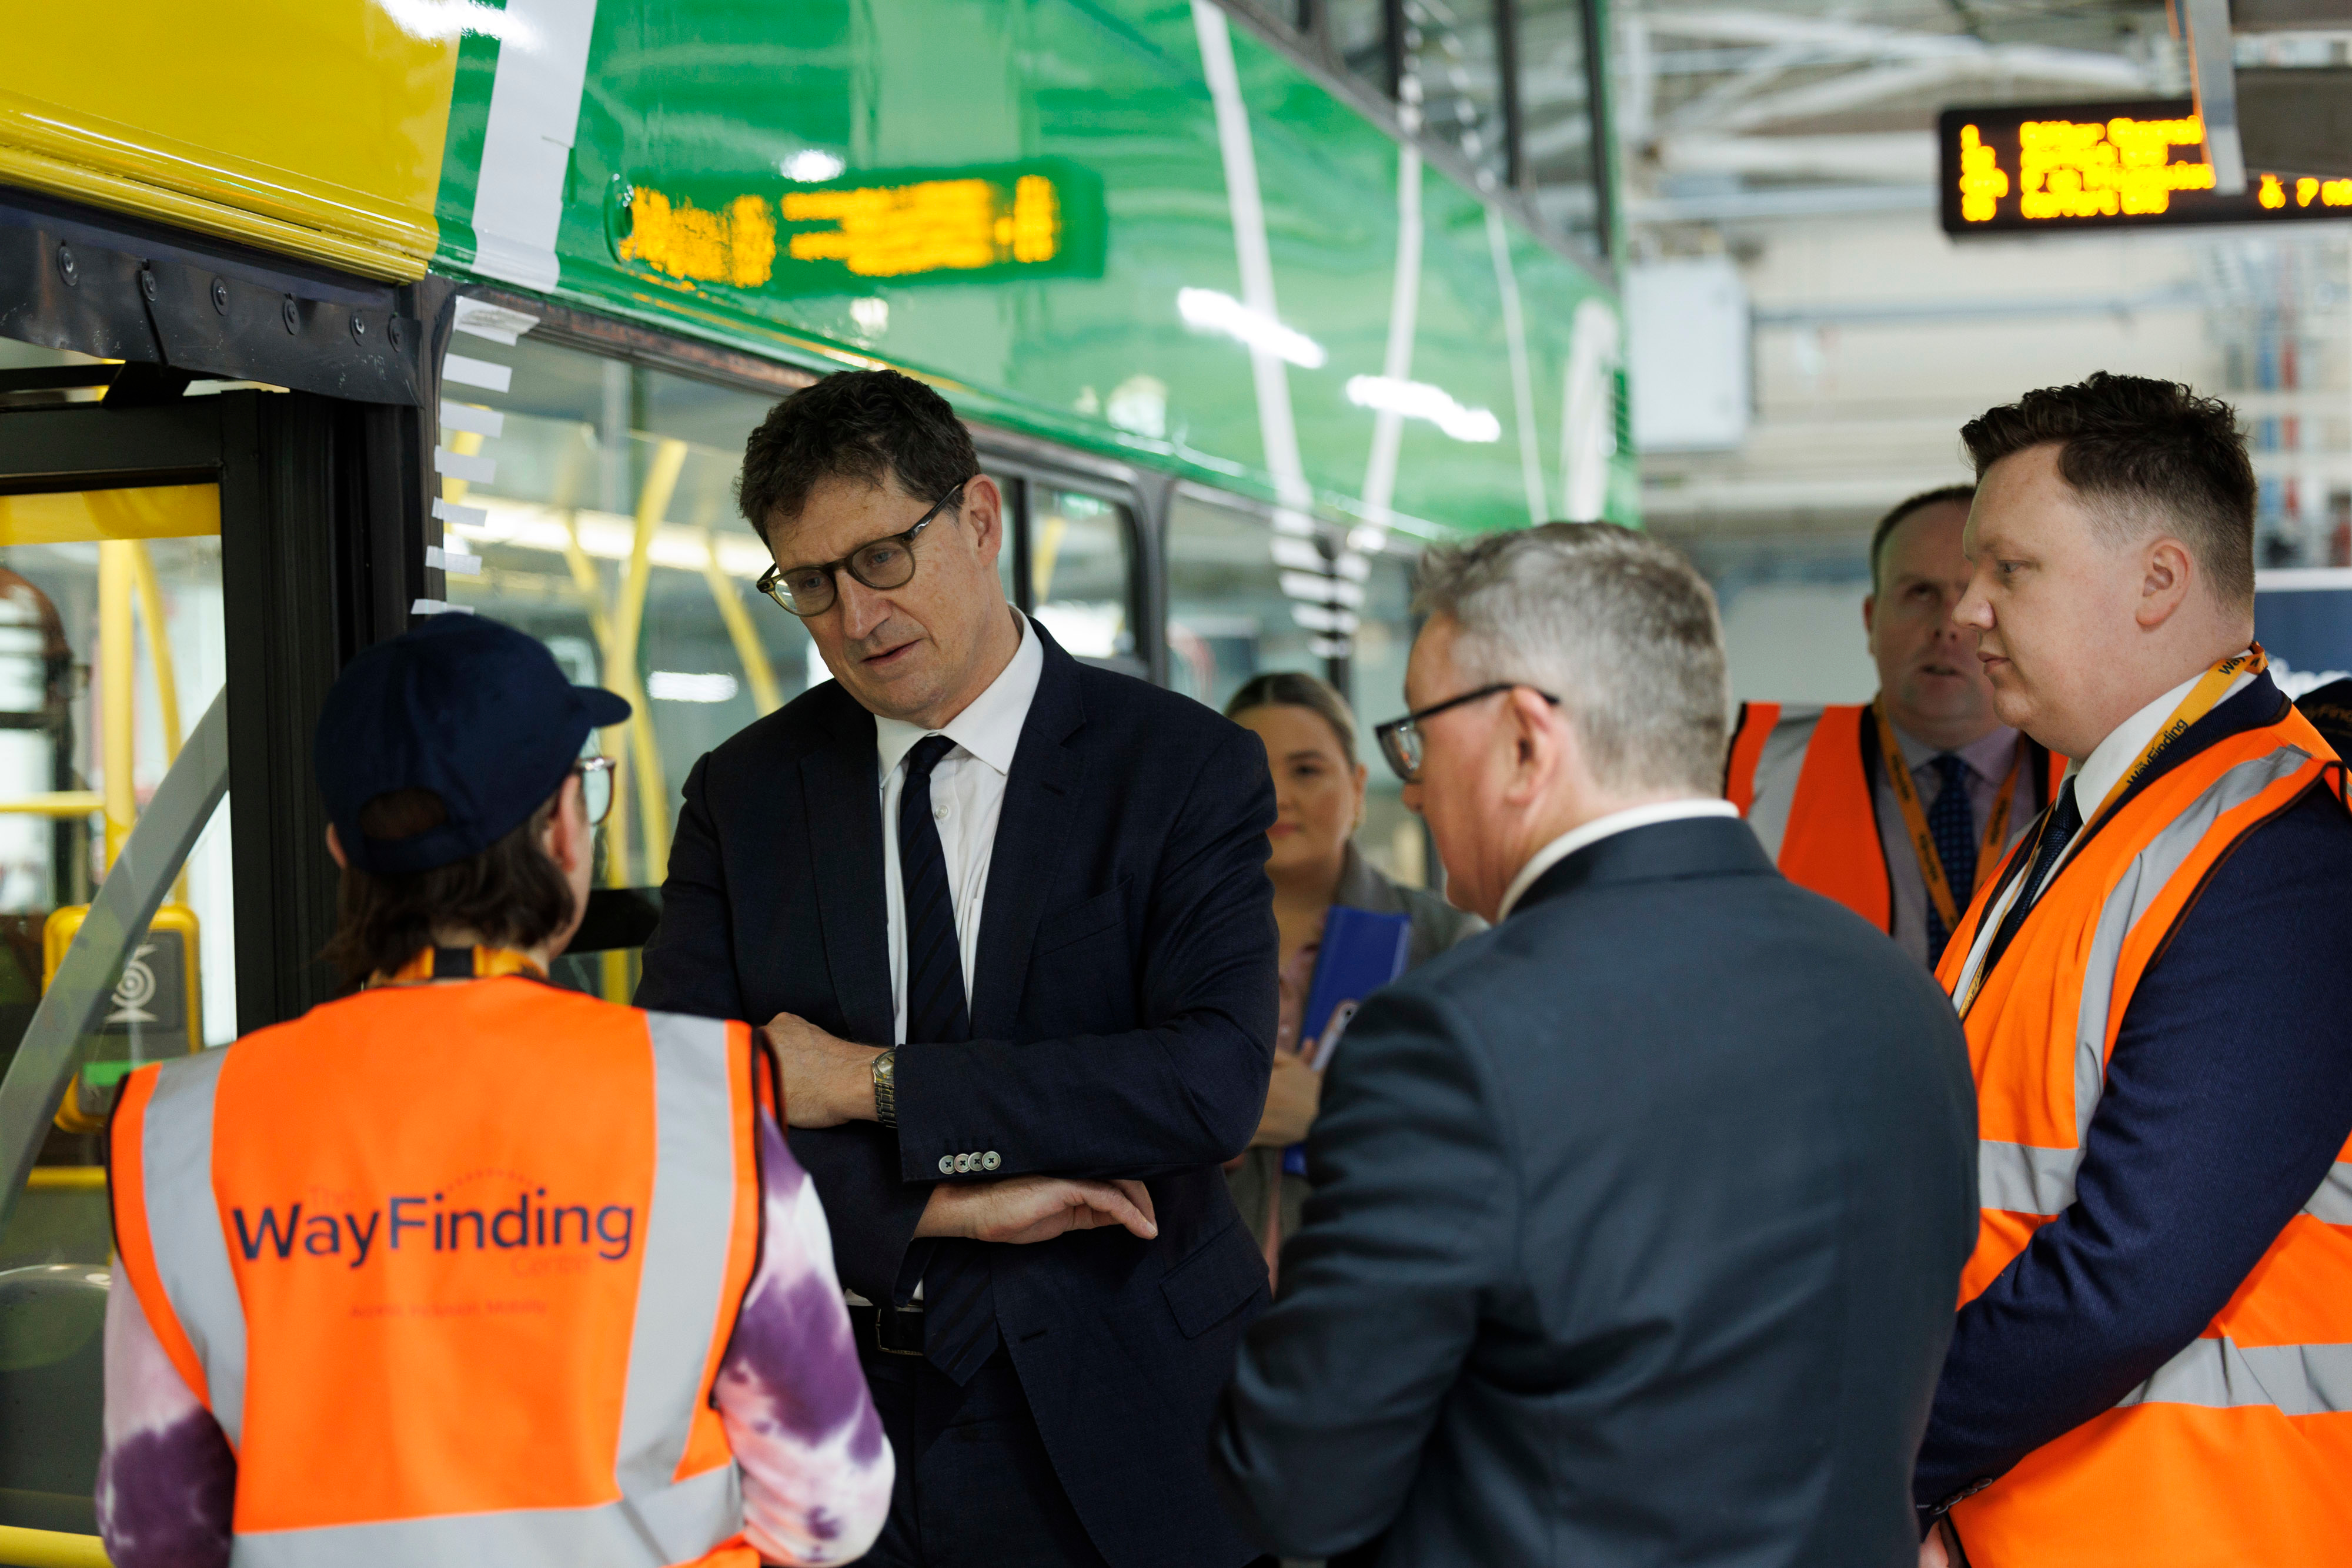 Minister Eamon Ryan previews the Go-Ahead Ireland double decker bus at the Vision Ireland Wayfinding Centre 